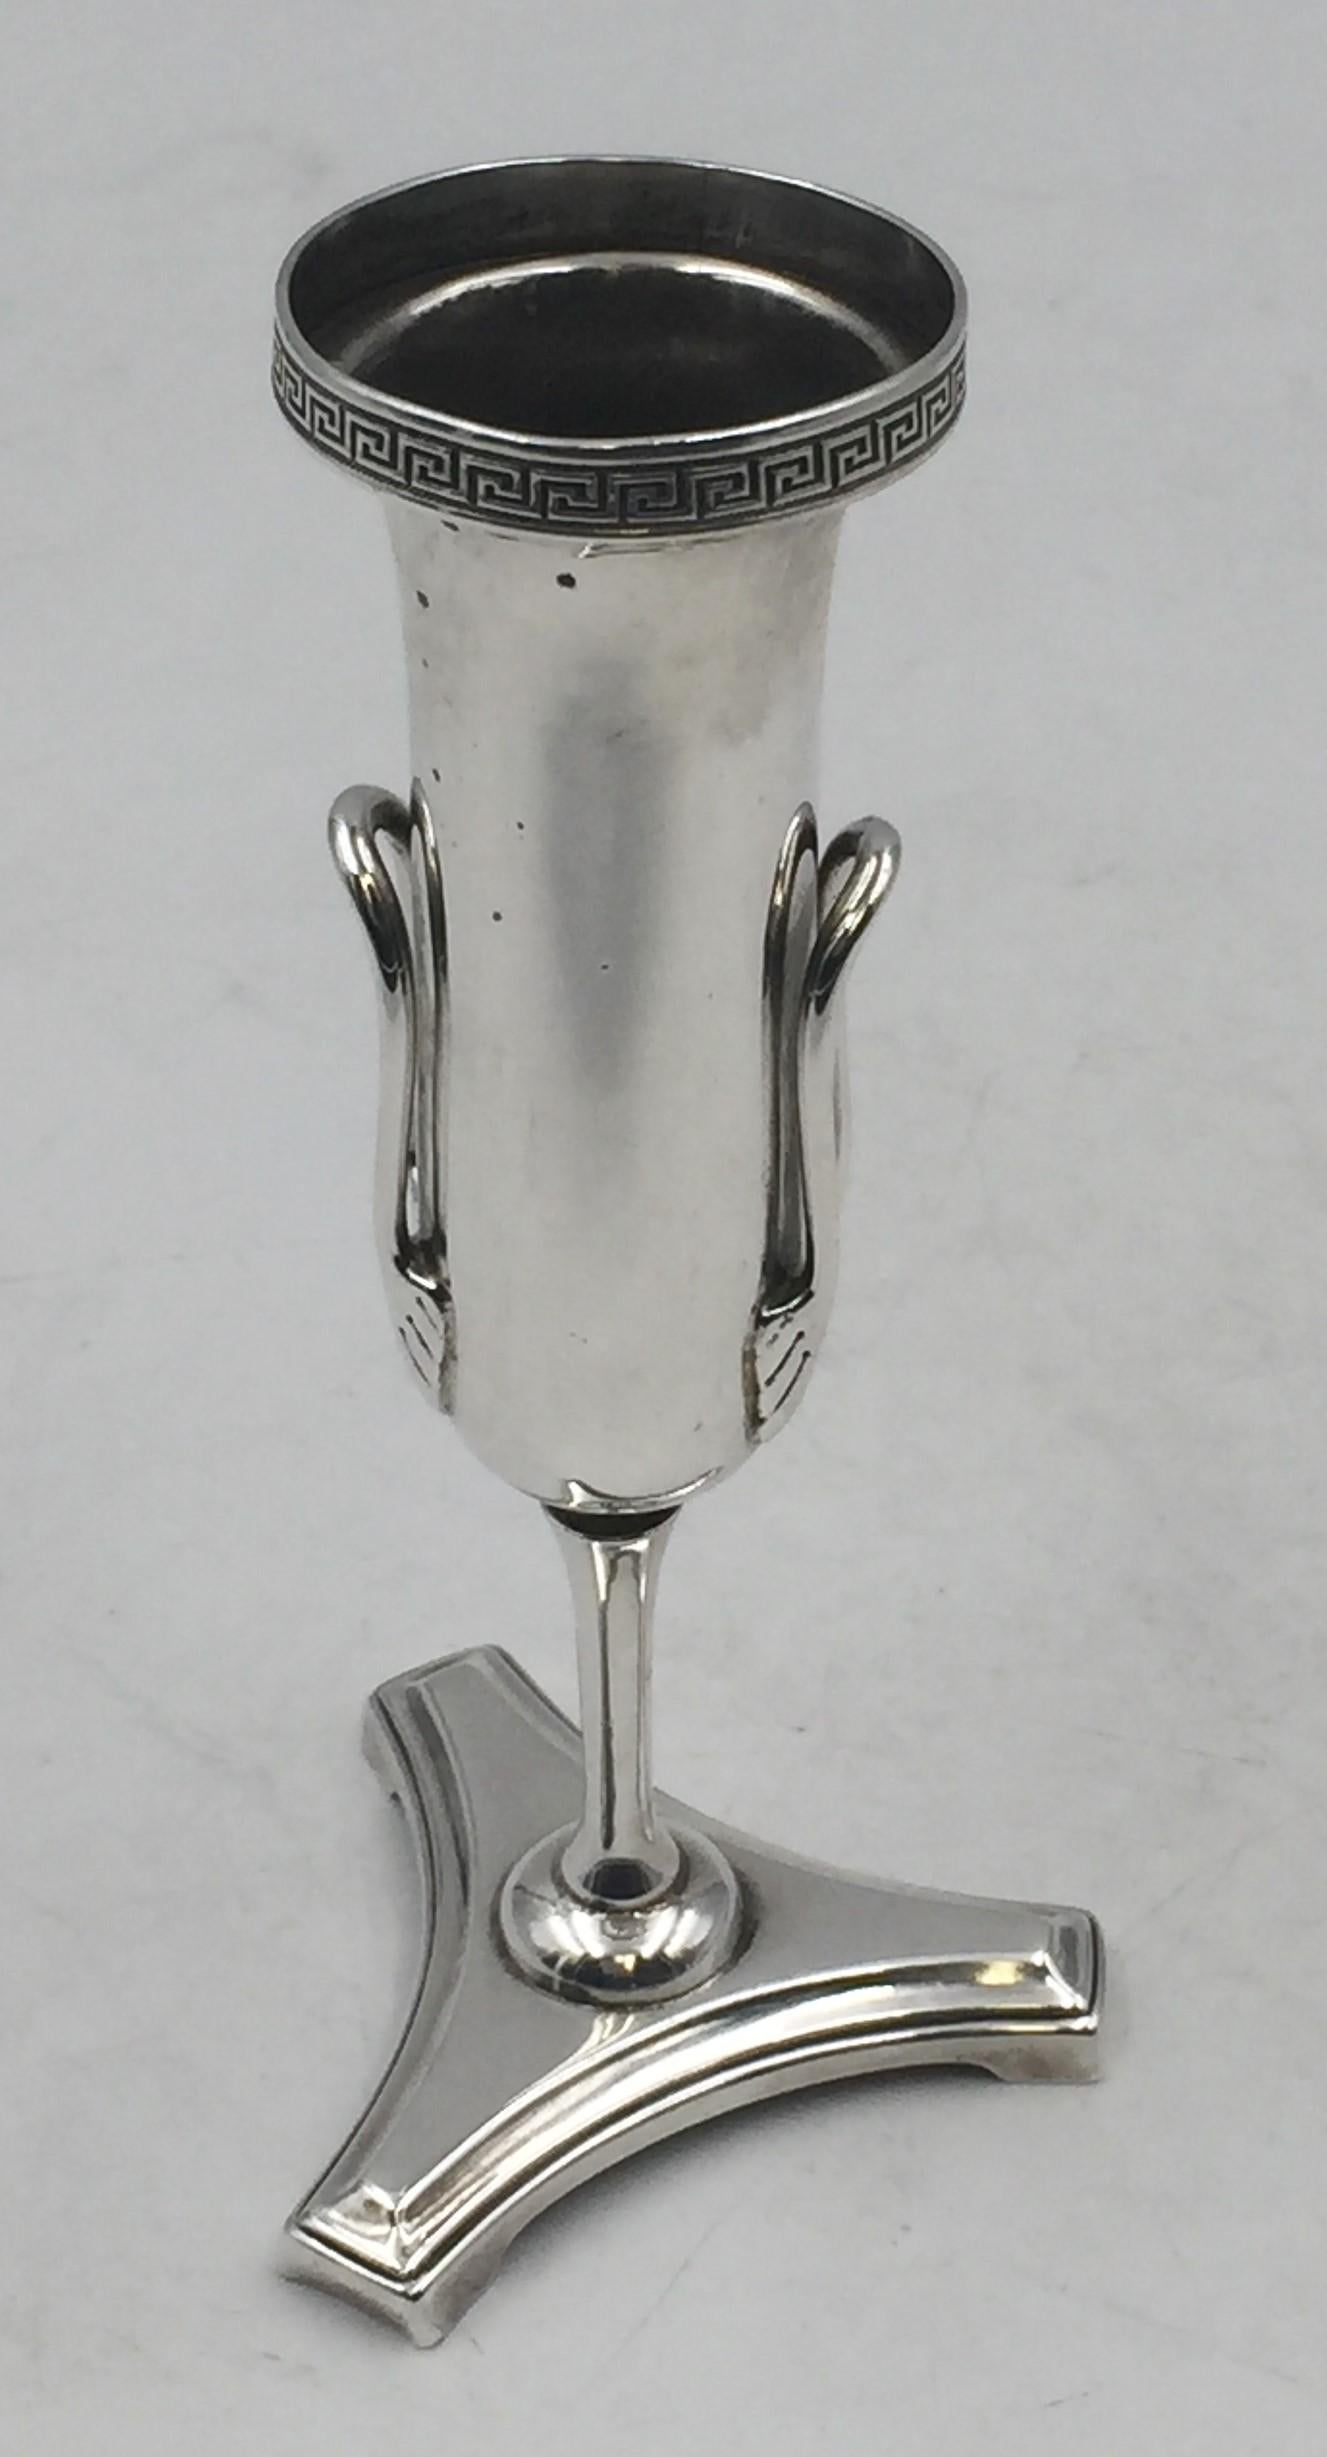 Gorham sterling silver bud vase in pattern 440 from the 1850s to mid-1860s in Neoclassical style with classical, frieze-like motifs on top, two applied decorative handles on the body, standing on a trilobed base. It measures 5 7/8'' in height by 2